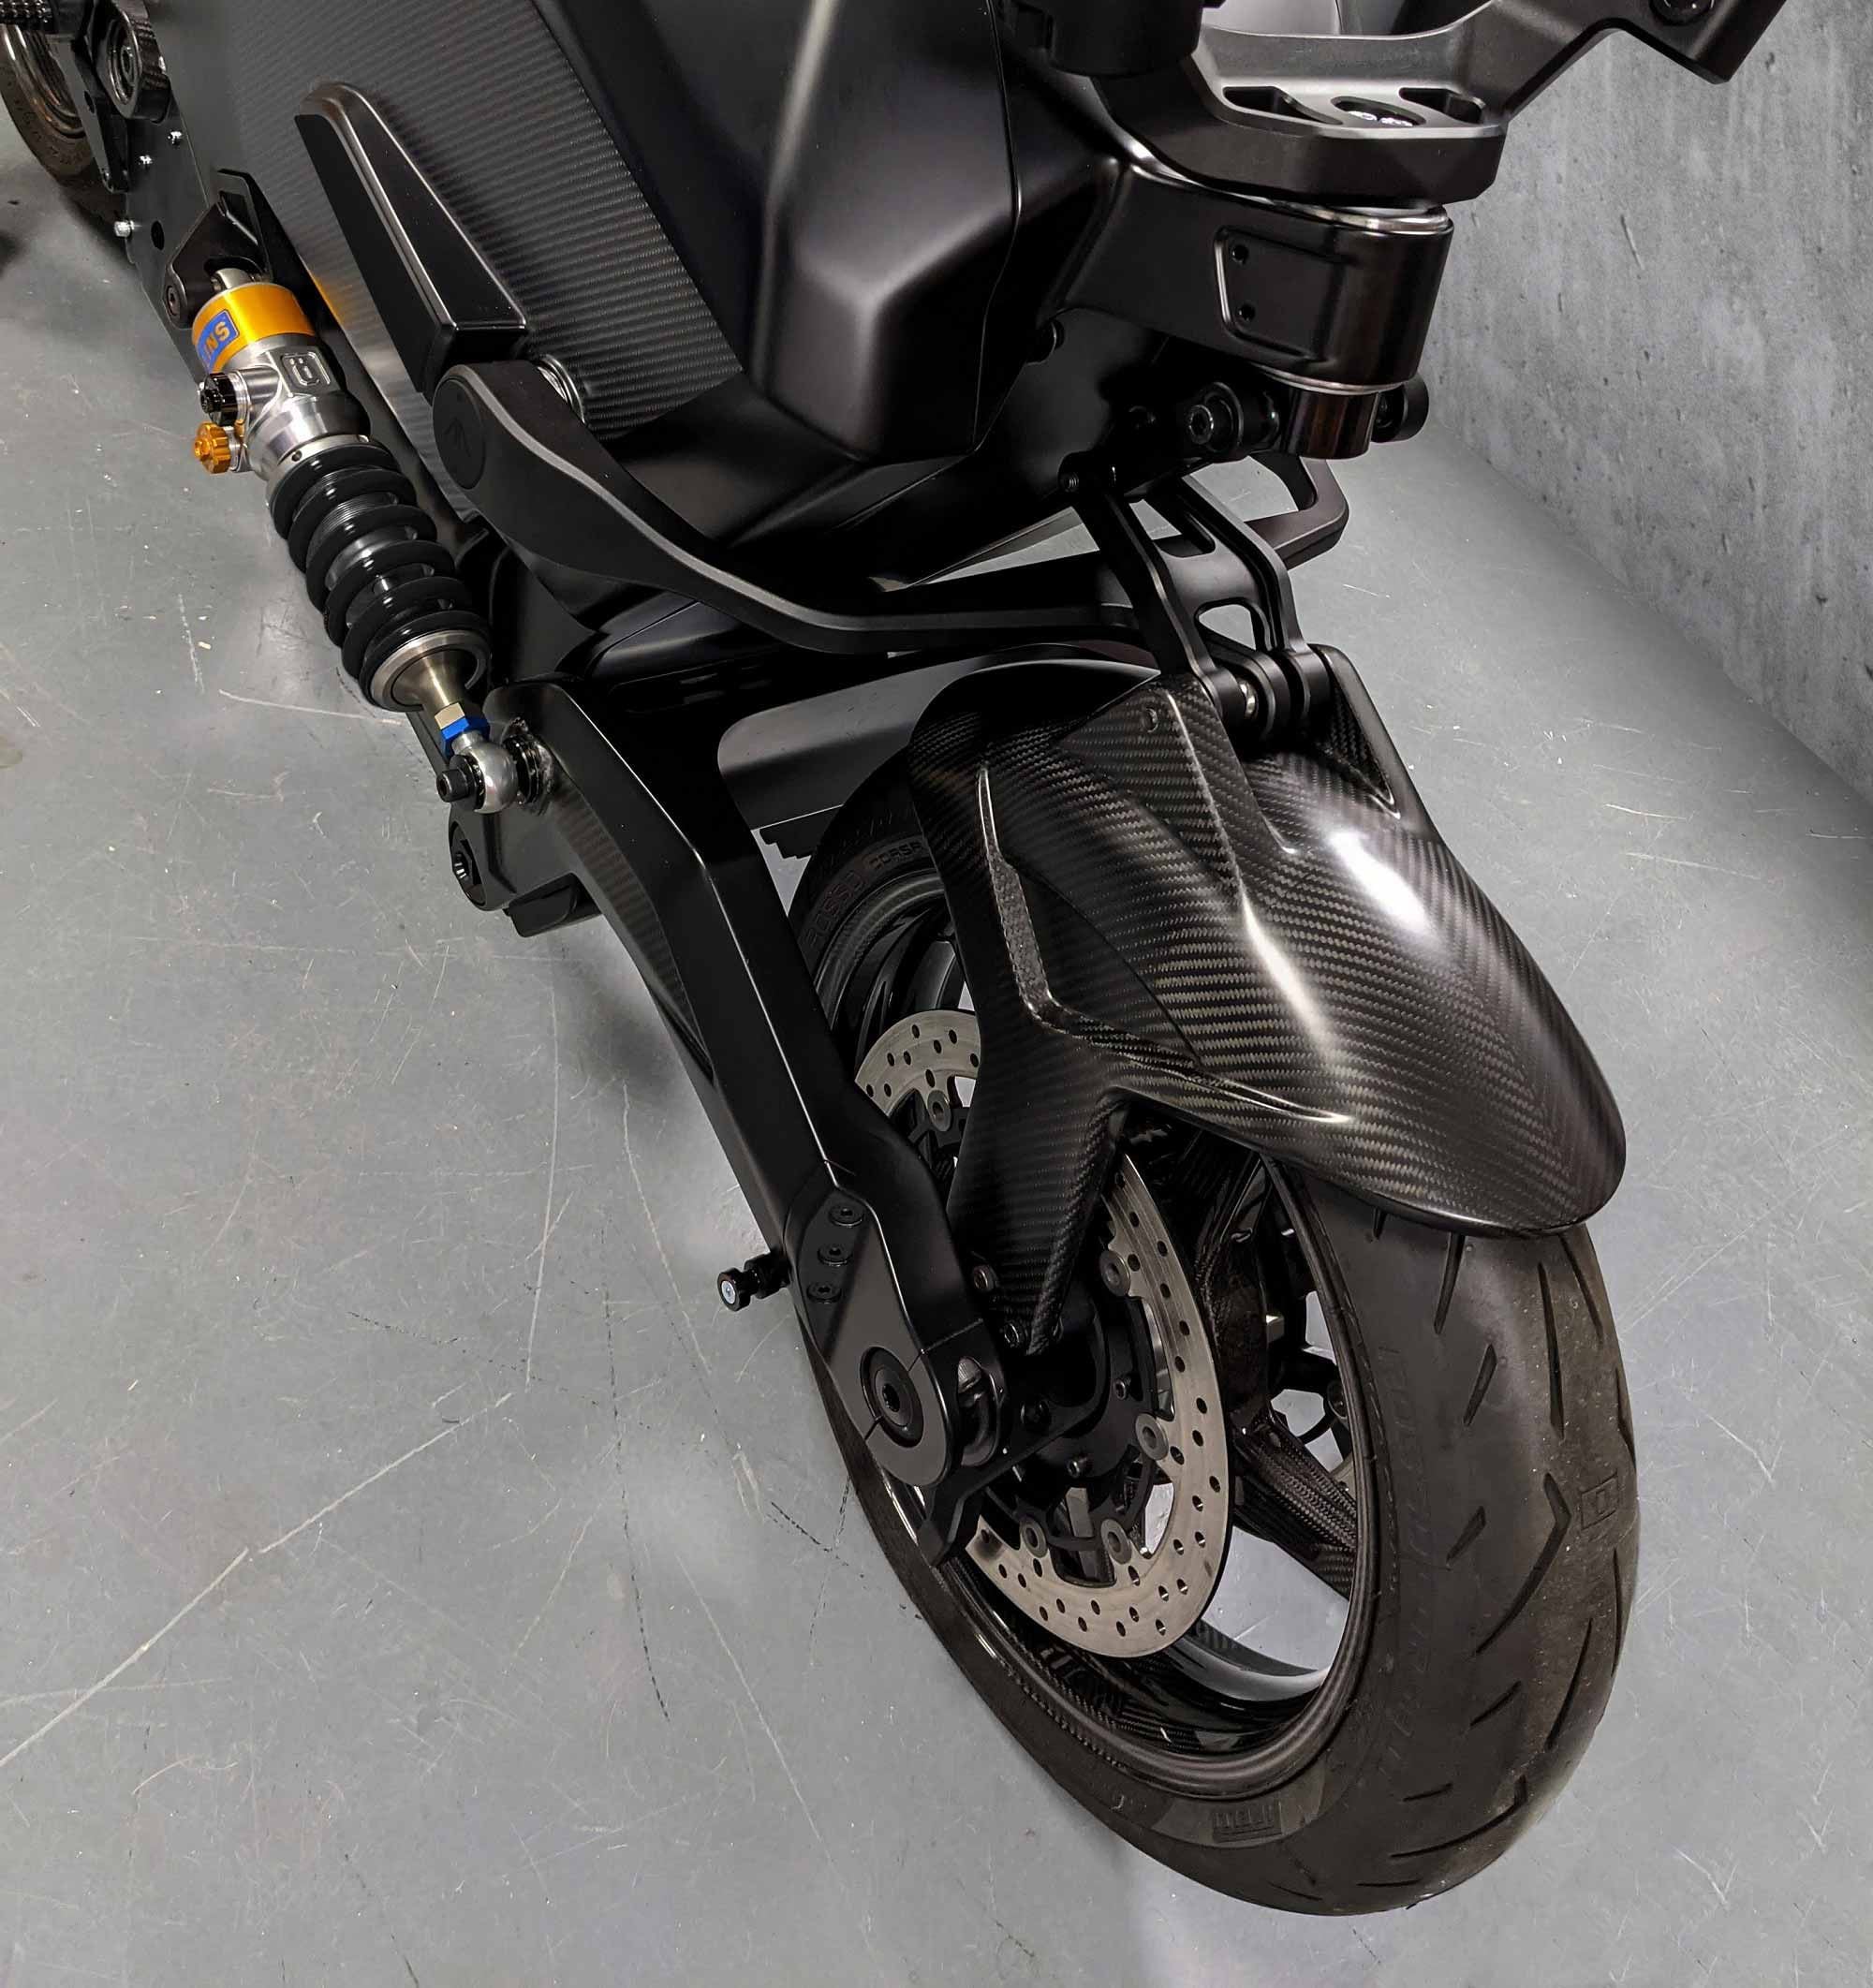 As before, the bike features a hub-center-steered front end with wishbone style dual swingarms.